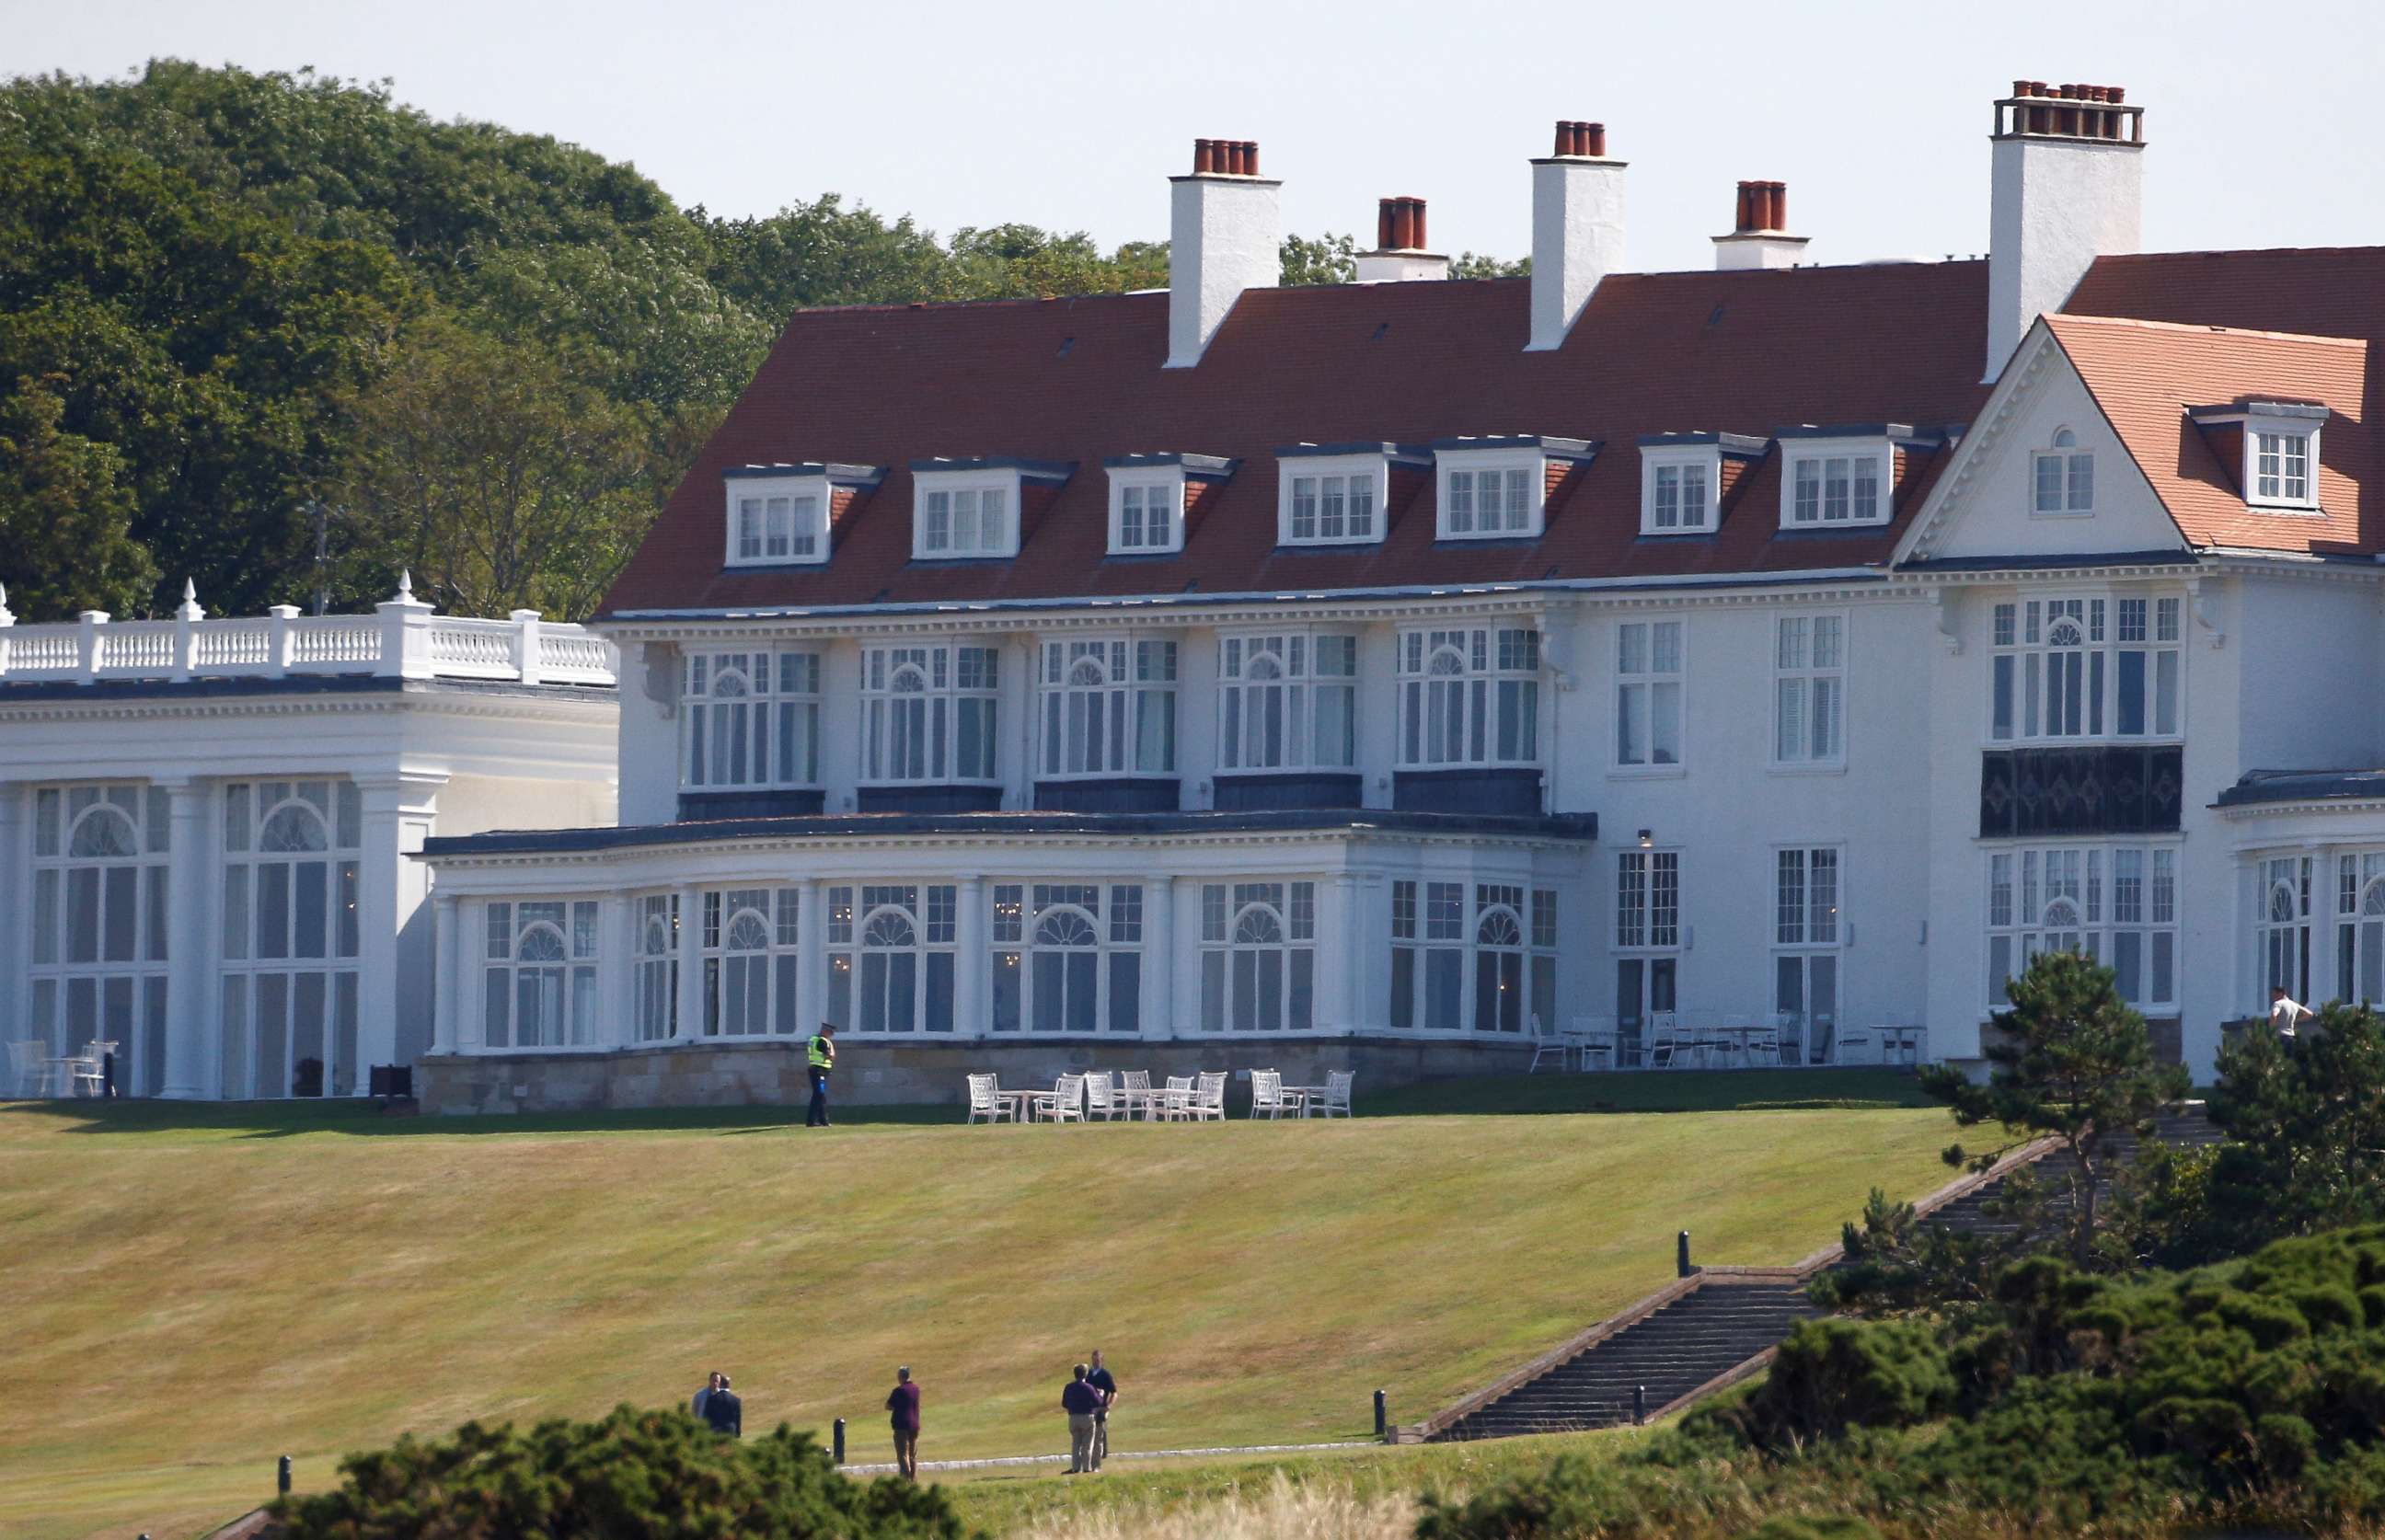 PHOTO: A police offer stands in the grounds of the golf resort owned by President Donald Trump, during Trump's stay at the resort, in Turnberry, Scotland, on July 14, 2018.